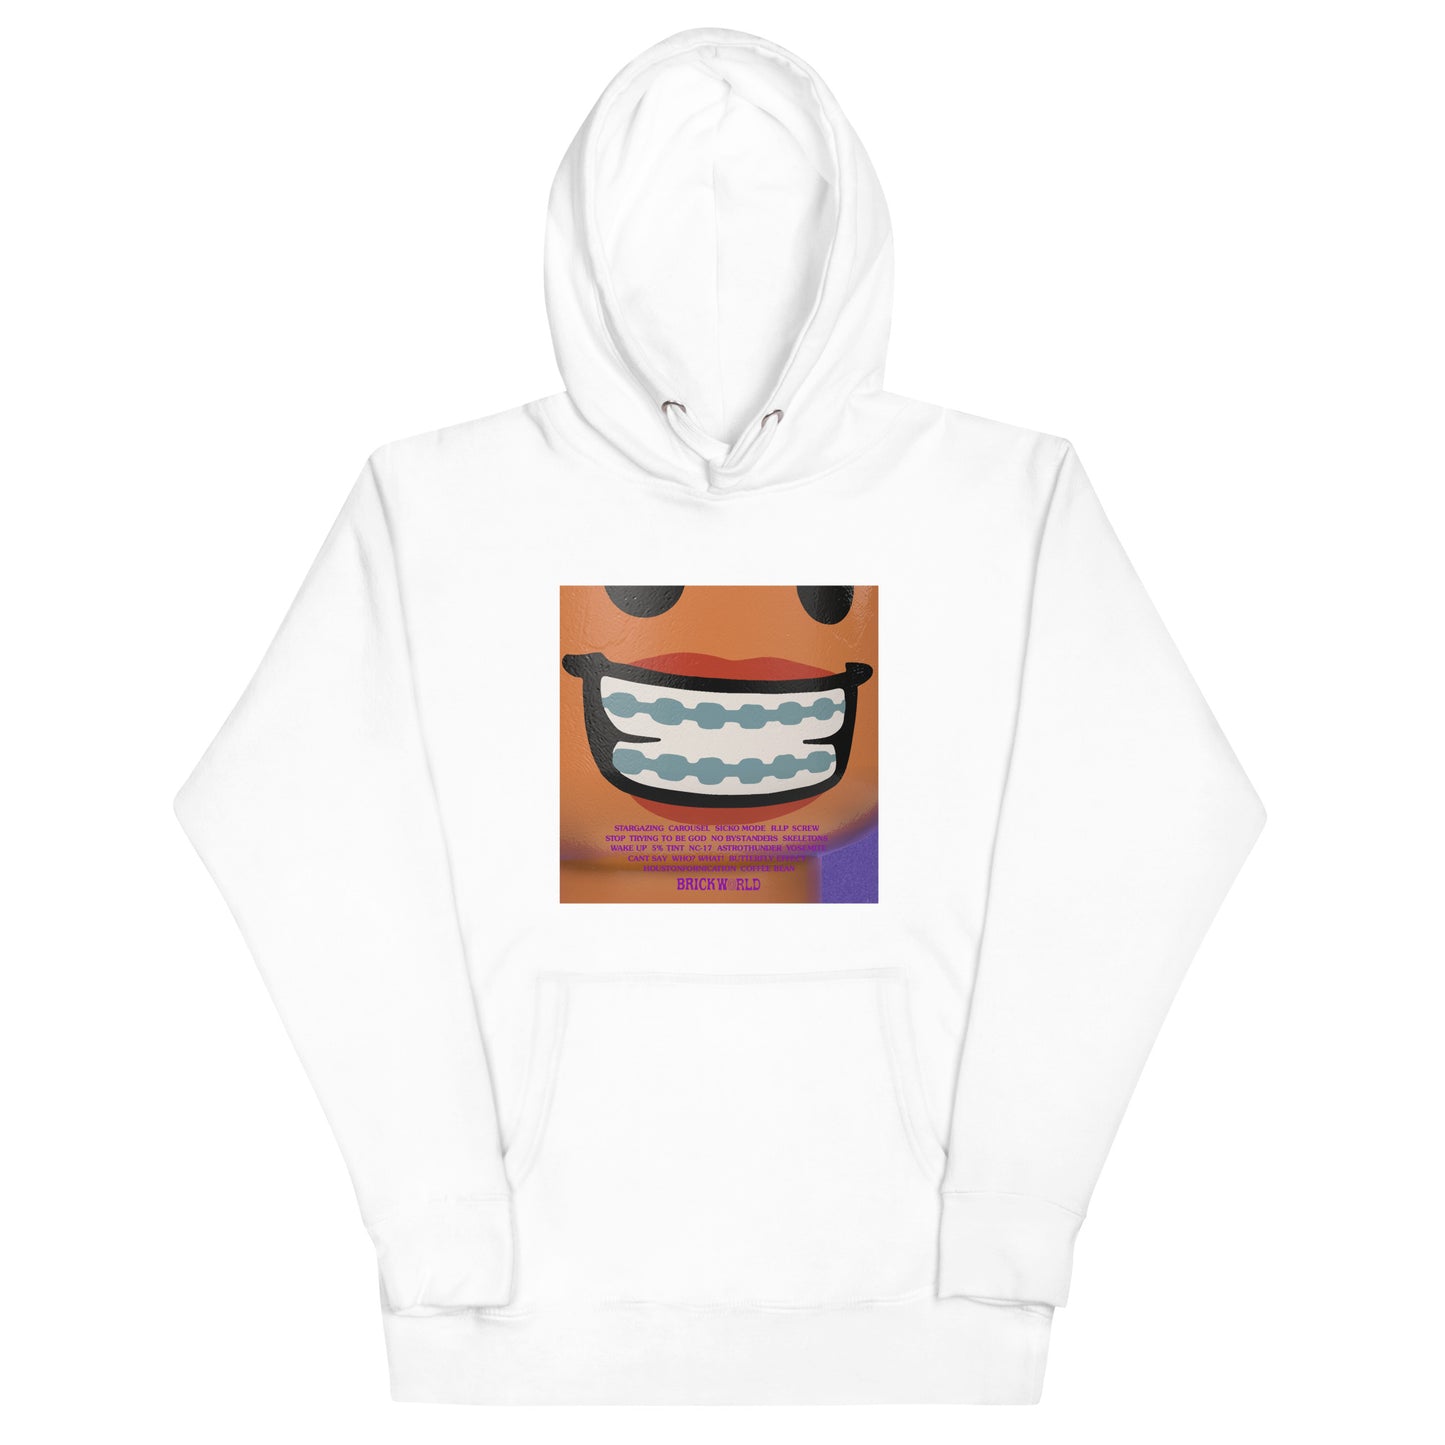 "Travis Scott - Astroworld (Physical “Back” Cover)" Lego Parody Hoodie